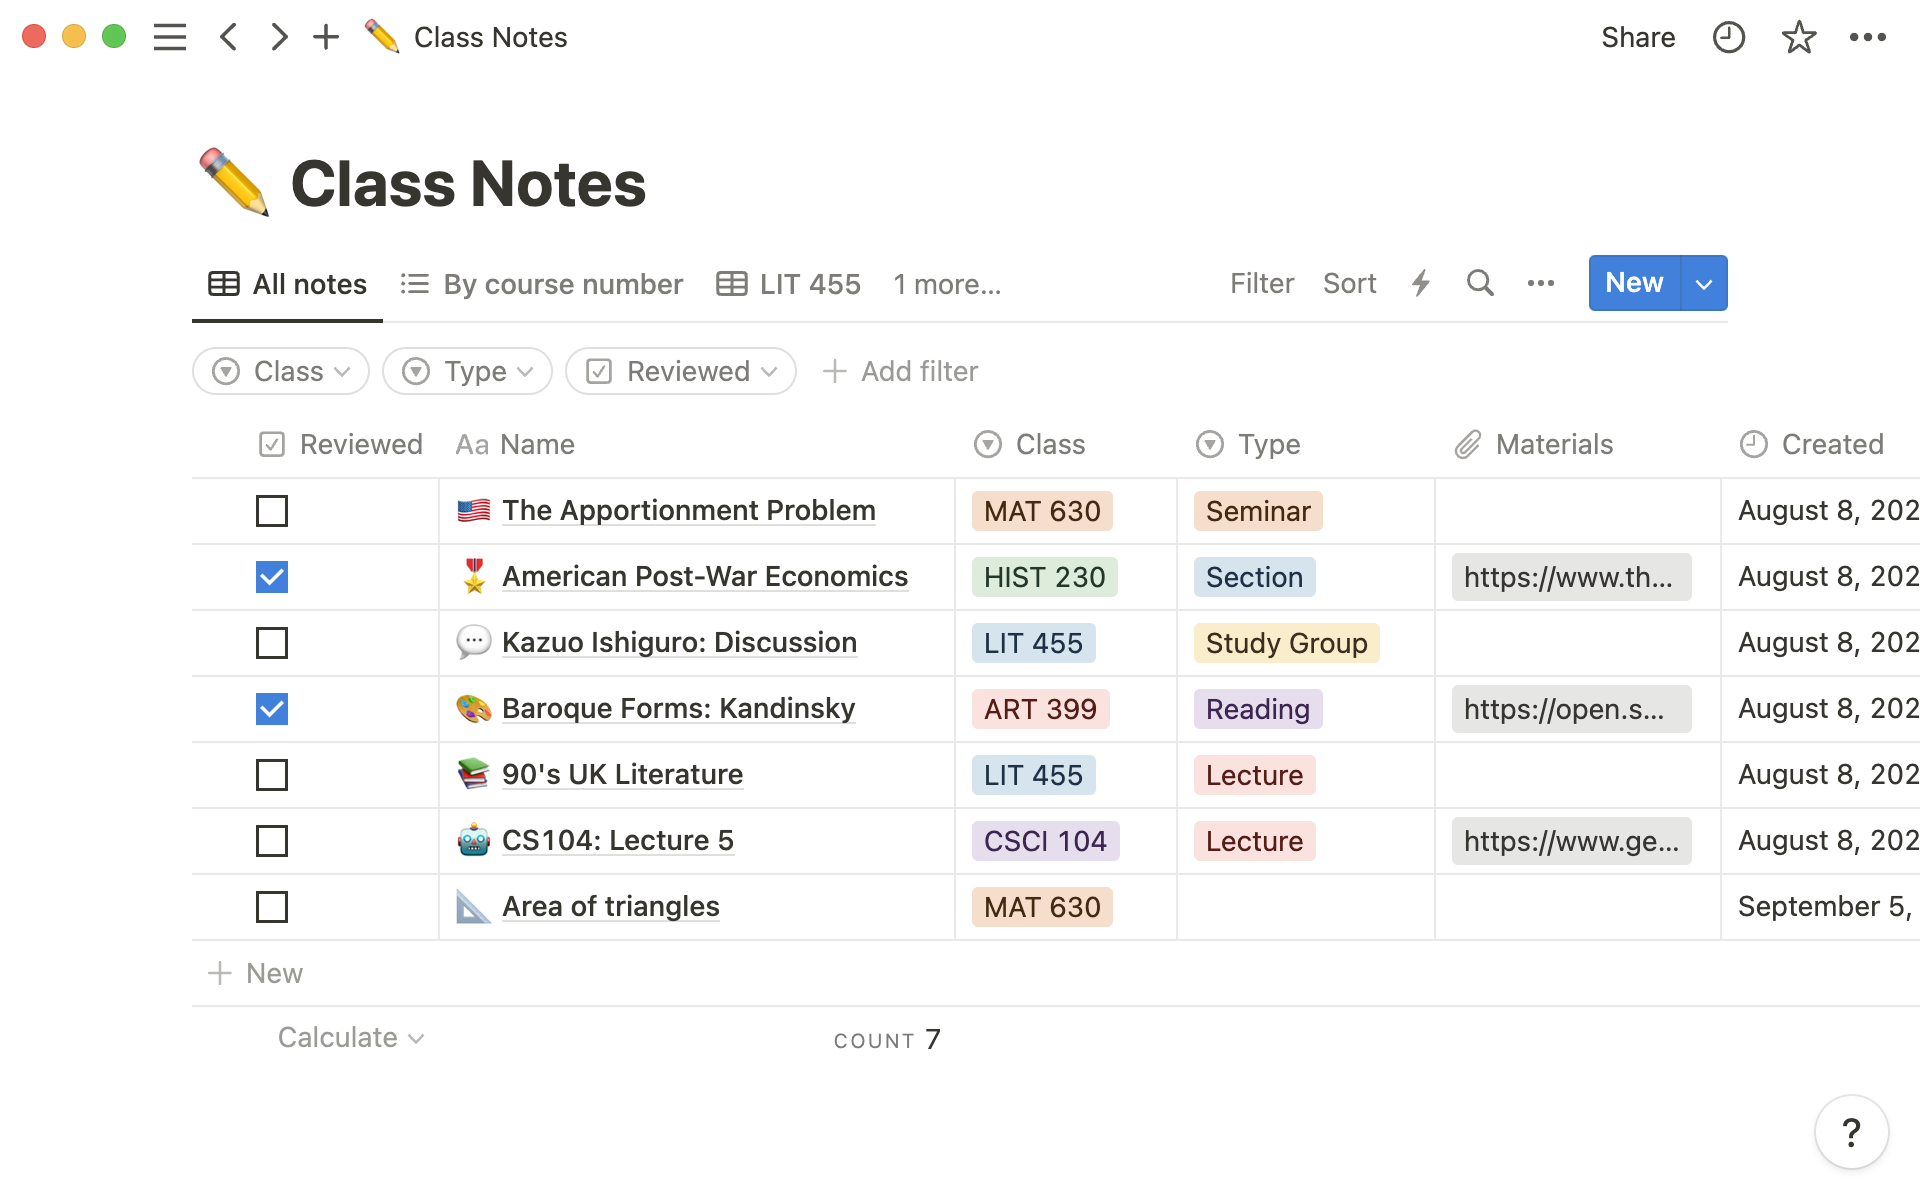 Organize and label all your class notes in a single database.